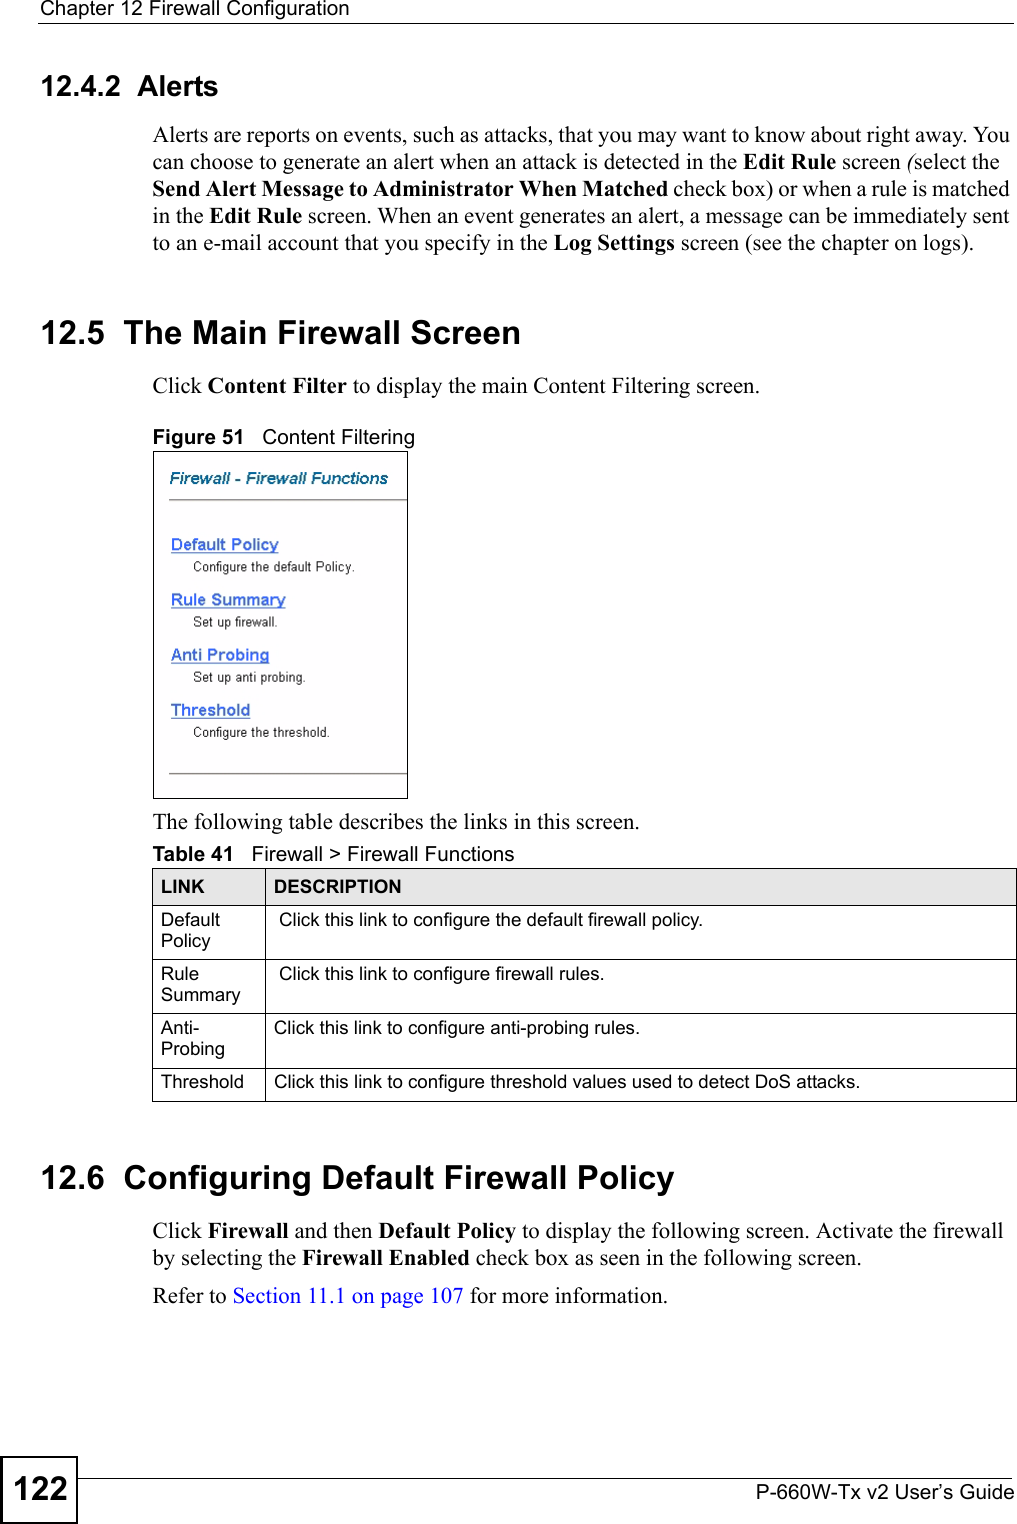 Chapter 12 Firewall ConfigurationP-660W-Tx v2 User’s Guide12212.4.2  AlertsAlerts are reports on events, such as attacks, that you may want to know about right away. You can choose to generate an alert when an attack is detected in the Edit Rule screen (select the Send Alert Message to Administrator When Matched check box) or when a rule is matched in the Edit Rule screen. When an event generates an alert, a message can be immediately sent to an e-mail account that you specify in the Log Settings screen (see the chapter on logs).12.5  The Main Firewall Screen Click Content Filter to display the main Content Filtering screen. Figure 51   Content Filtering The following table describes the links in this screen. 12.6  Configuring Default Firewall Policy   Click Firewall and then Default Policy to display the following screen. Activate the firewall by selecting the Firewall Enabled check box as seen in the following screen.Refer to Section 11.1 on page 107 for more information. Table 41   Firewall &gt; Firewall FunctionsLINK DESCRIPTIONDefault Policy Click this link to configure the default firewall policy.Rule Summary Click this link to configure firewall rules. Anti-ProbingClick this link to configure anti-probing rules.Threshold Click this link to configure threshold values used to detect DoS attacks. 